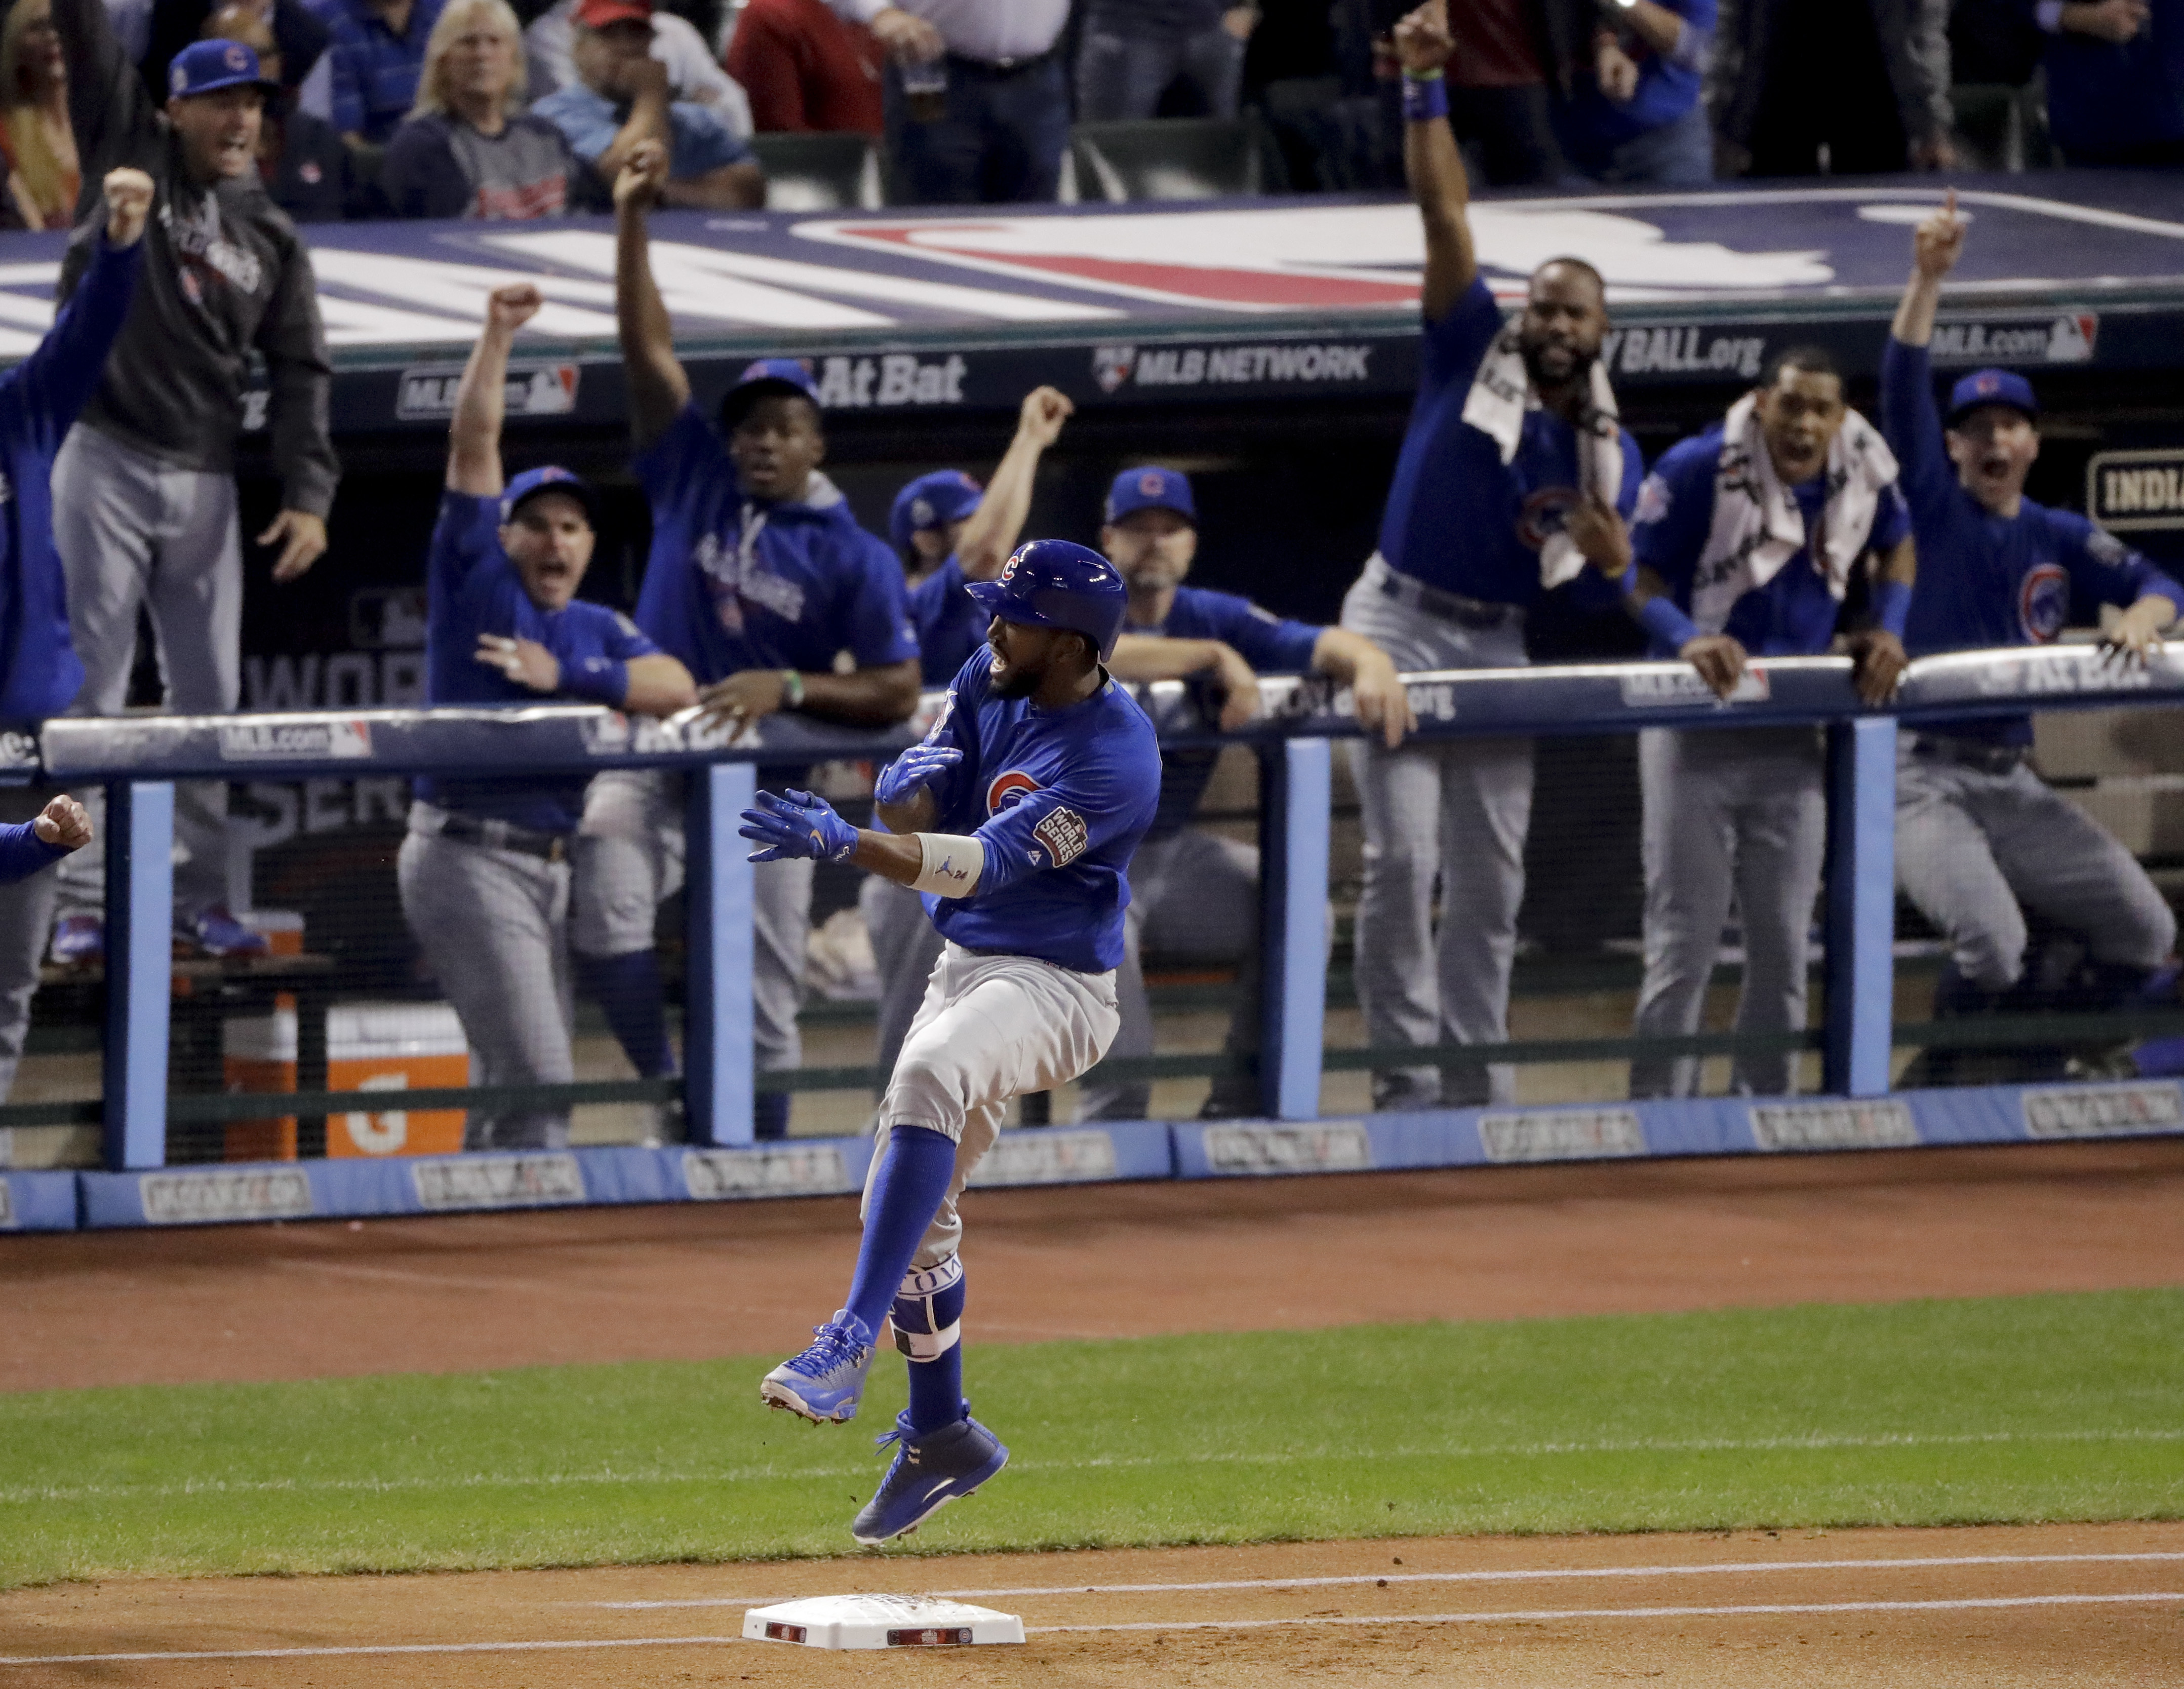 World Series: Here's How the Chicago Cubs Won Game 2 - The New